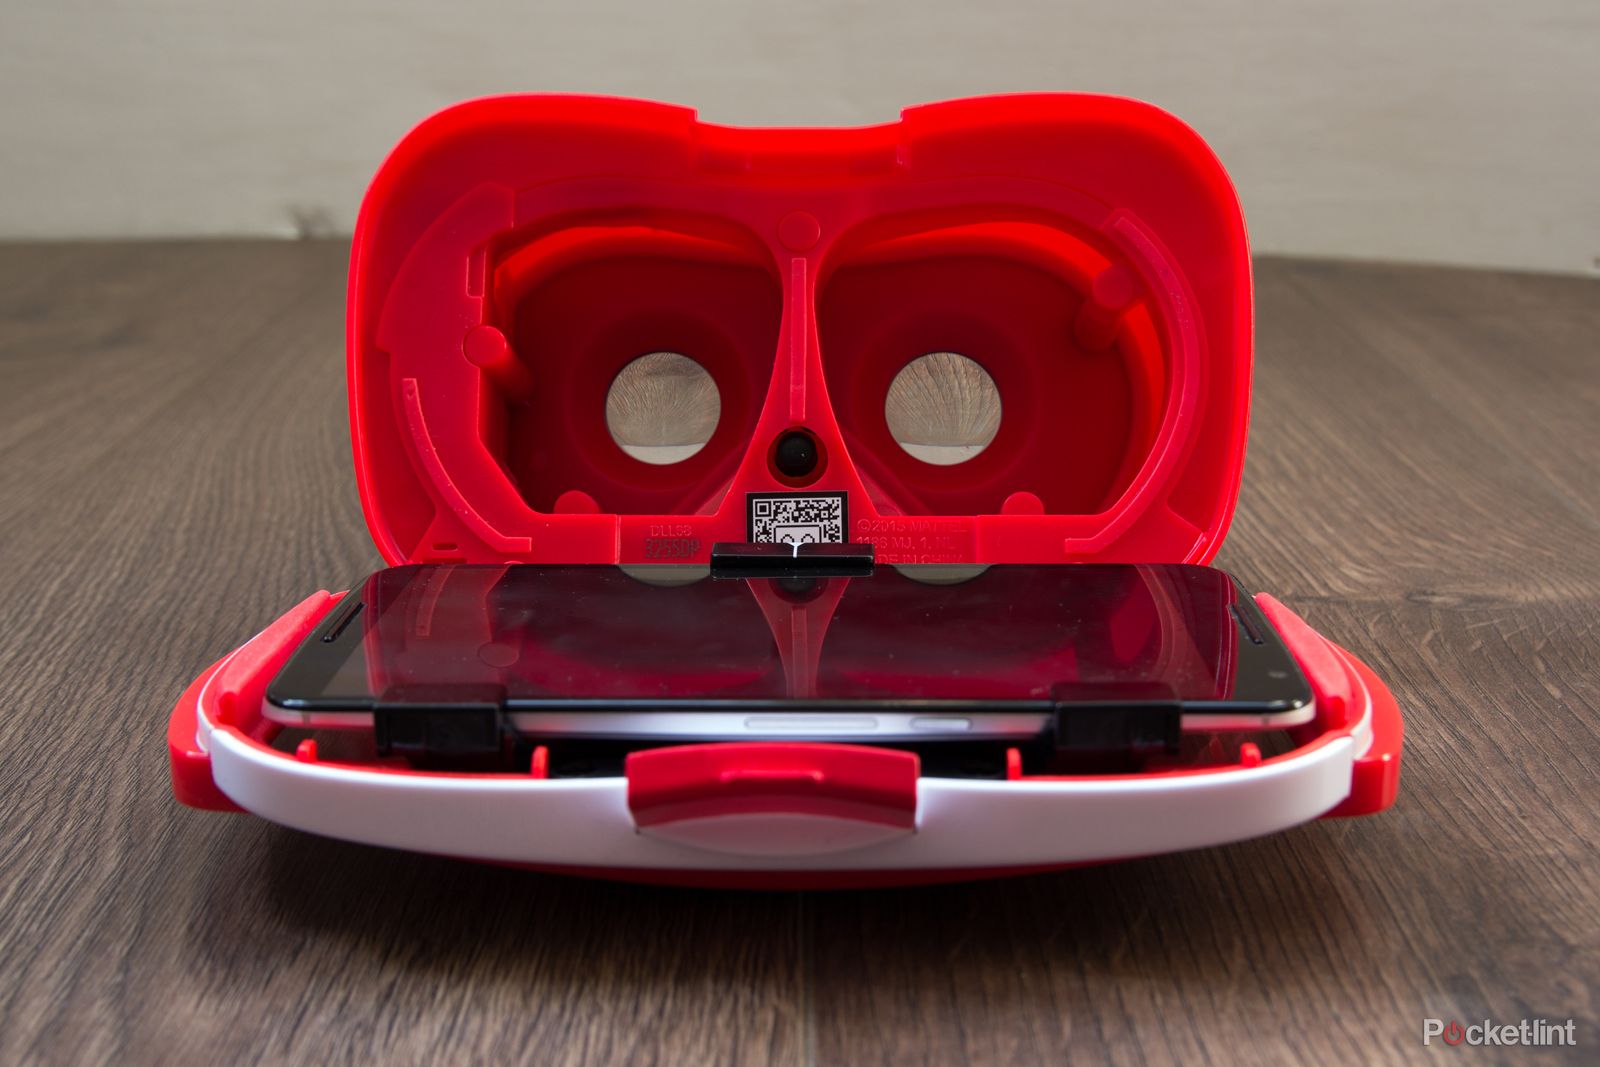 Mattel View-Master review: A virtual reality rethinking of a classic